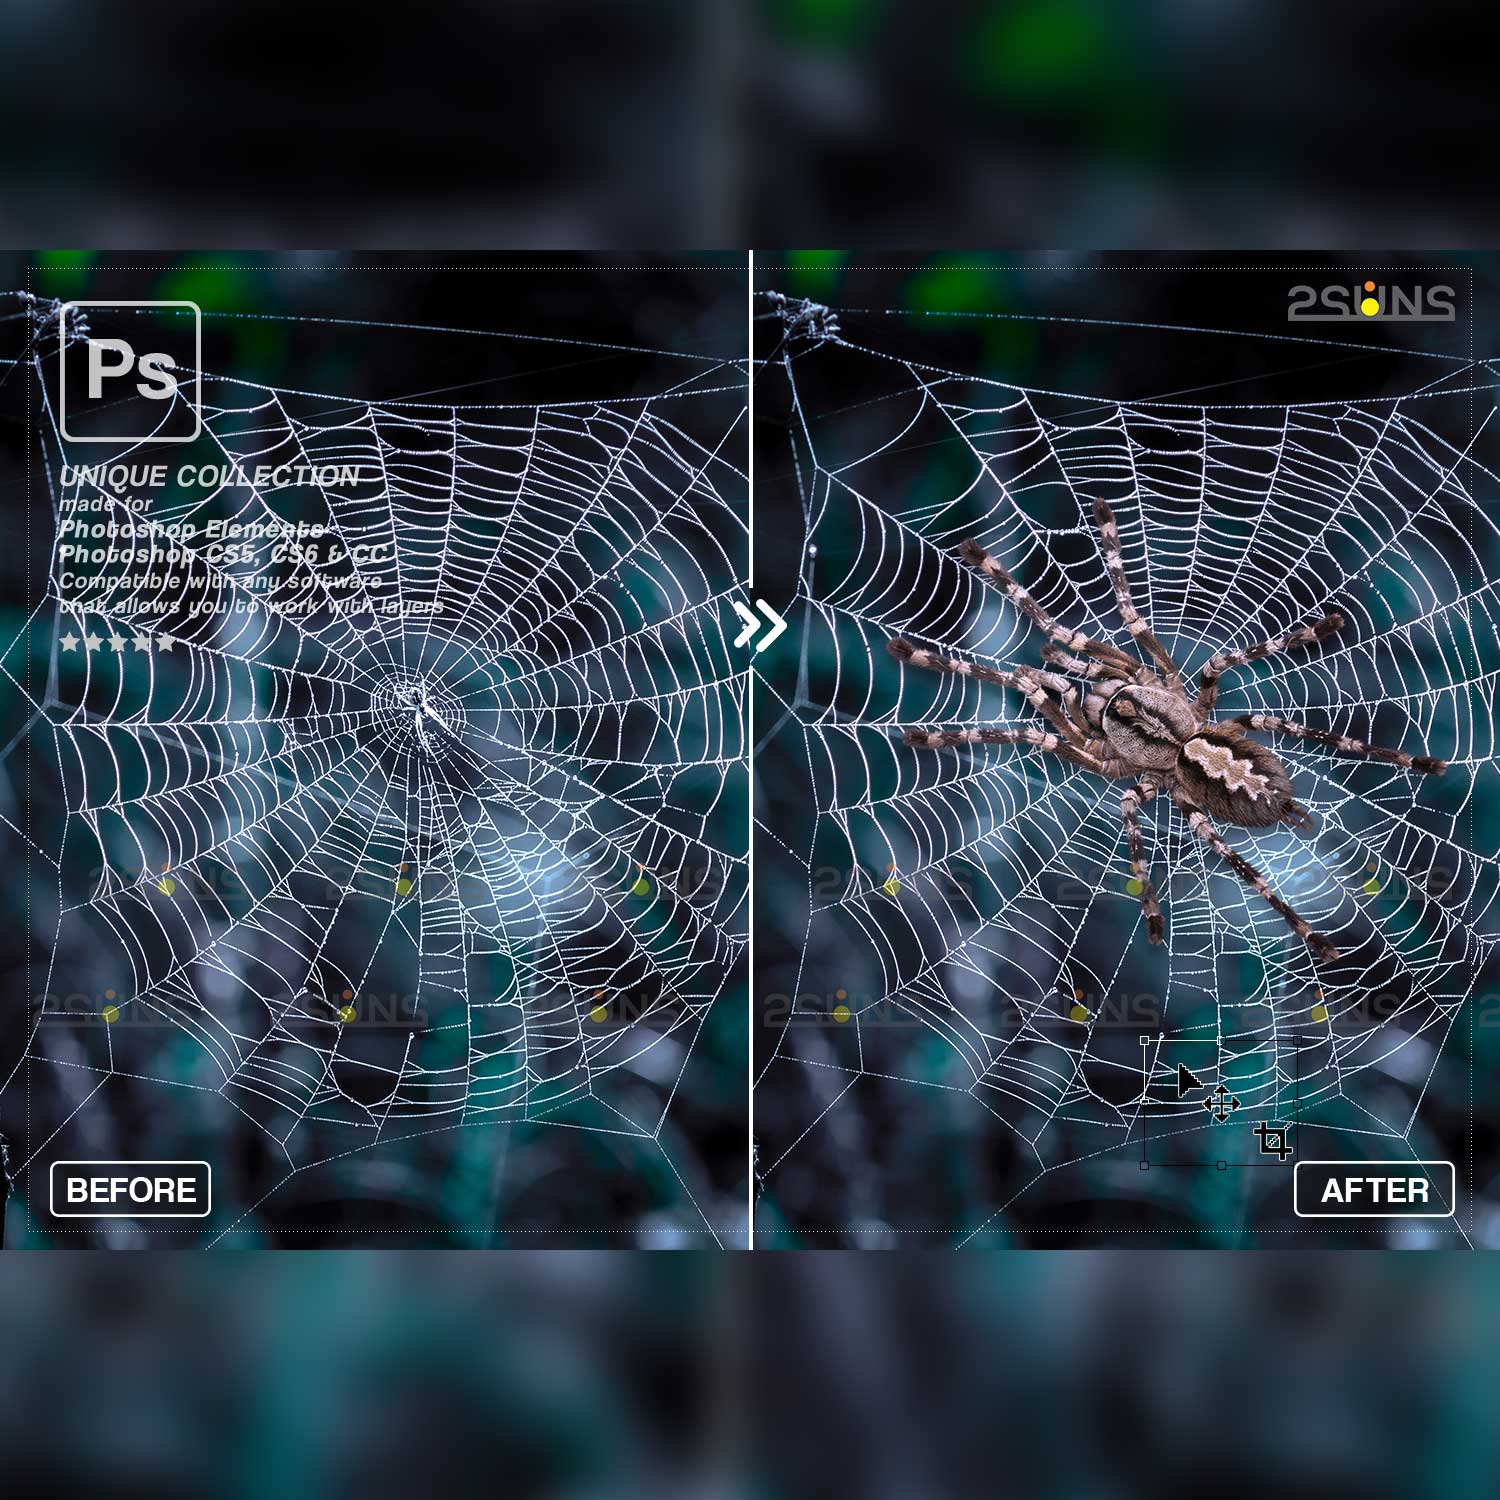 Spider Photoshop Overlays cover image.